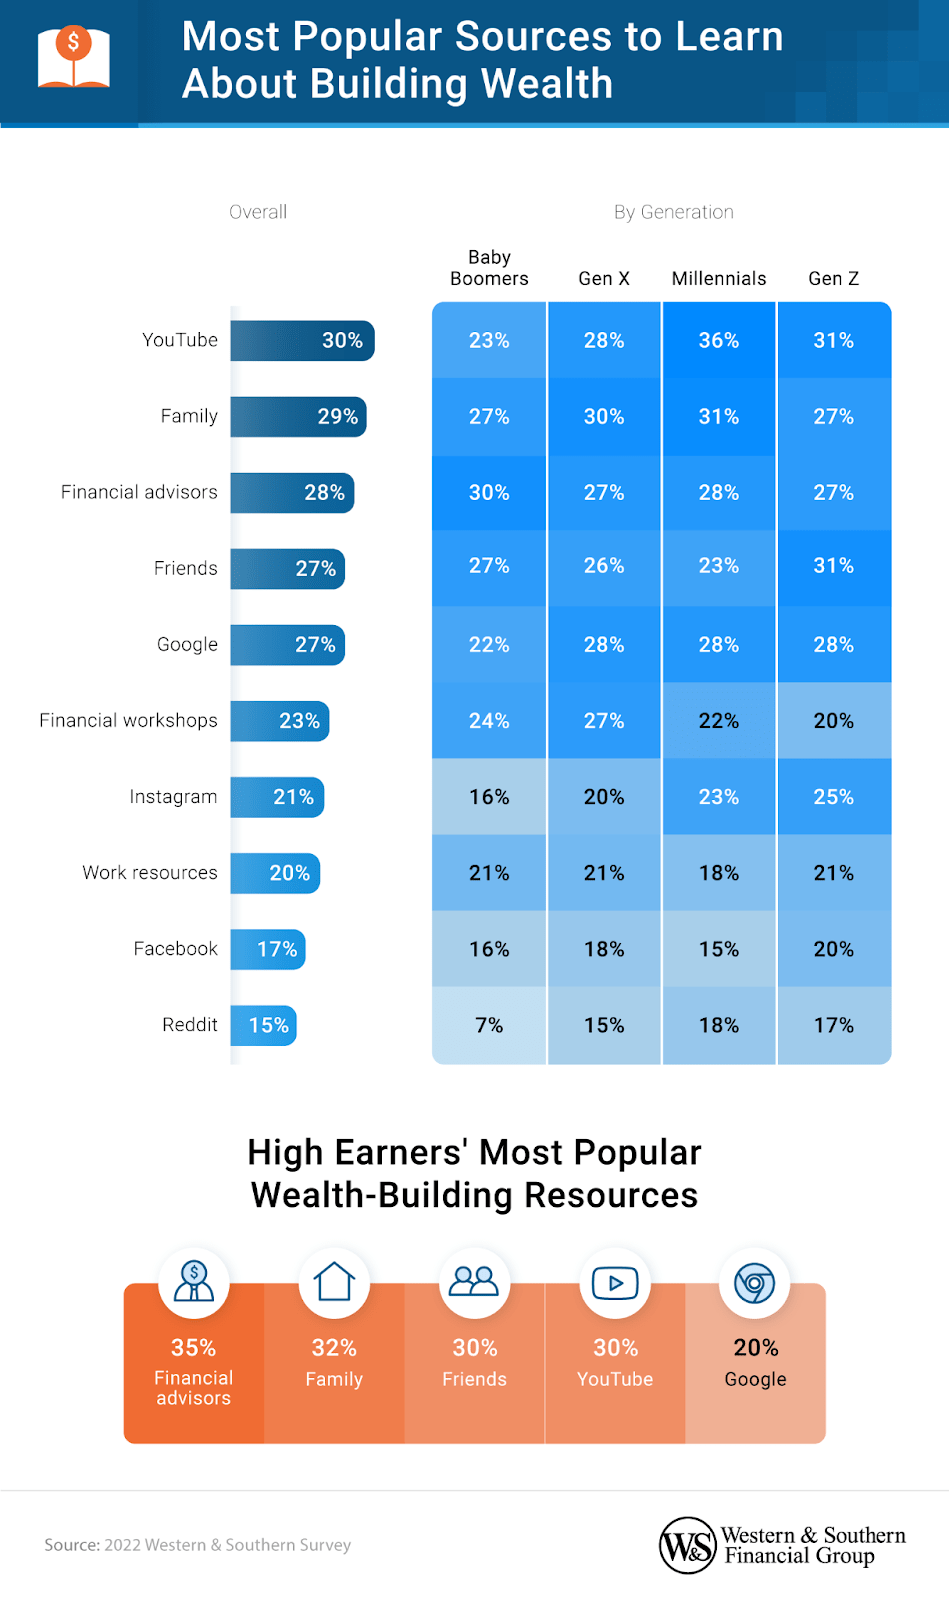 The most popular sources to learn about building wealth among Gen Xers is from their family. 